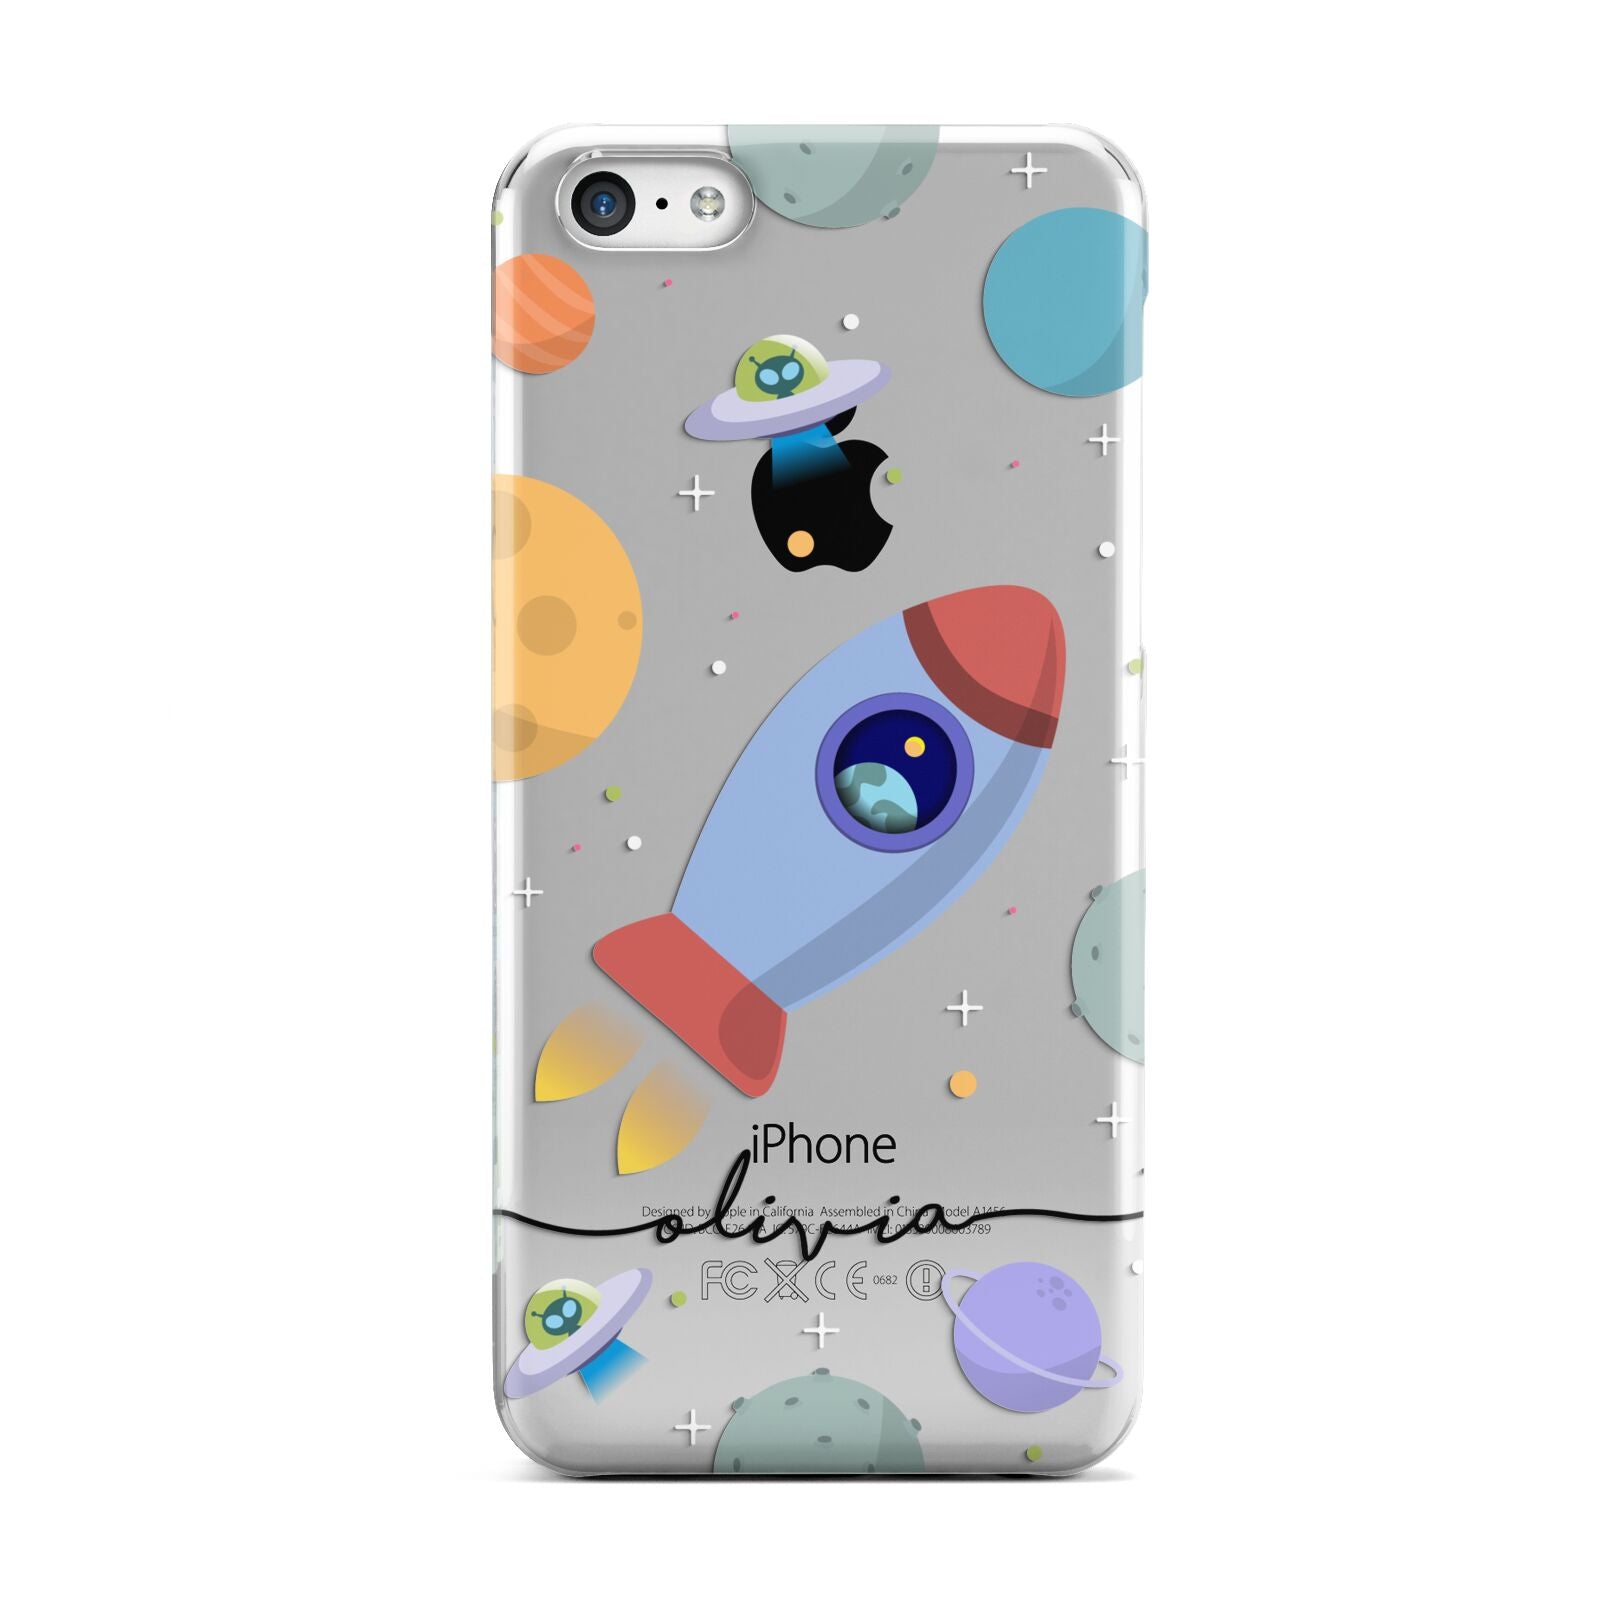 Cartoon Space Artwork with Name Apple iPhone 5c Case